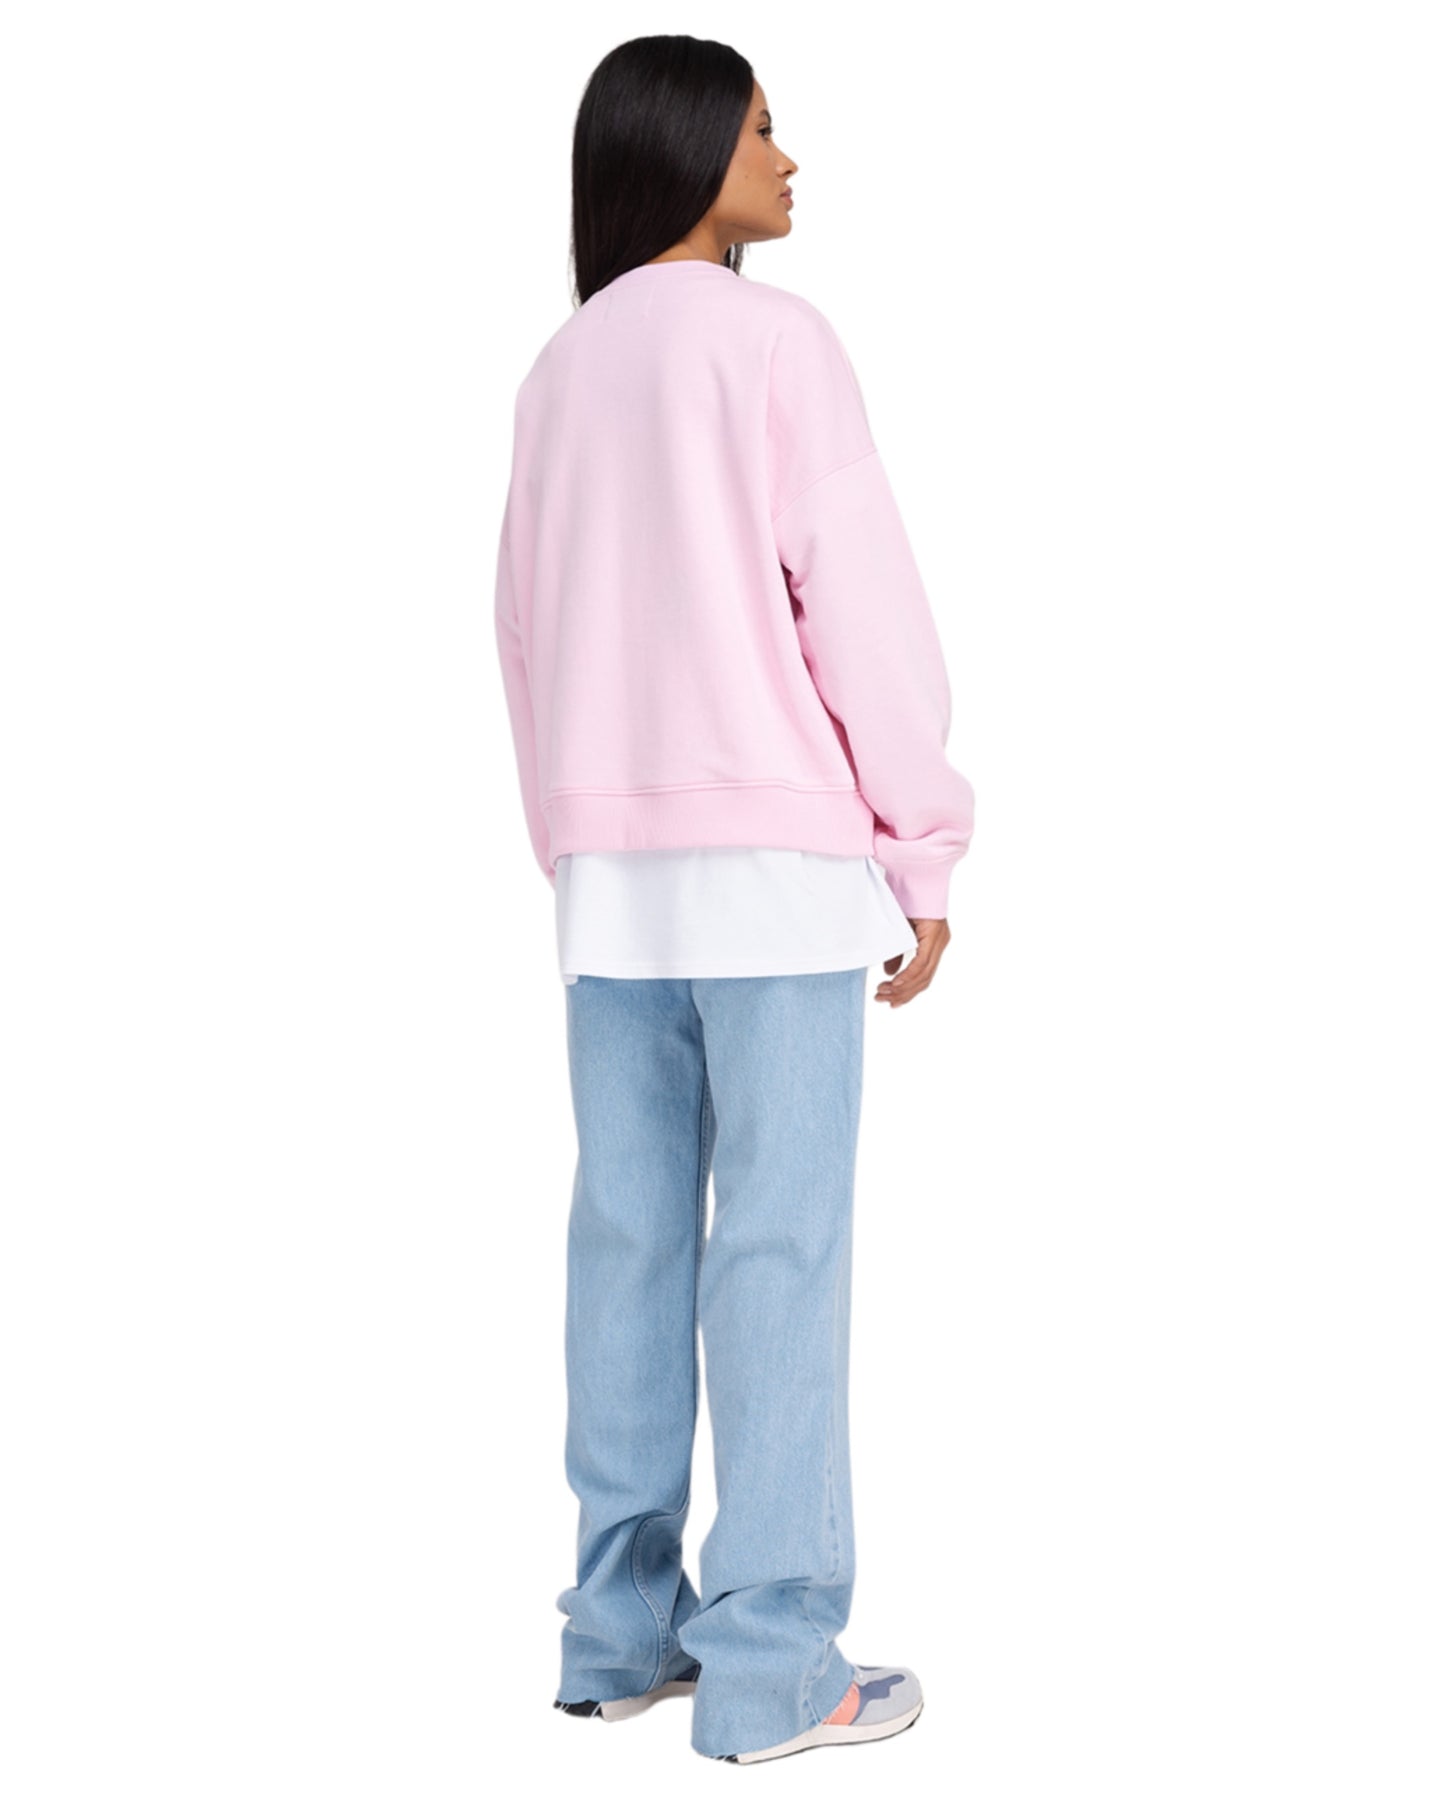 SWEATSHIRT WITH EMBLEM EMBROIDERY IN PINK